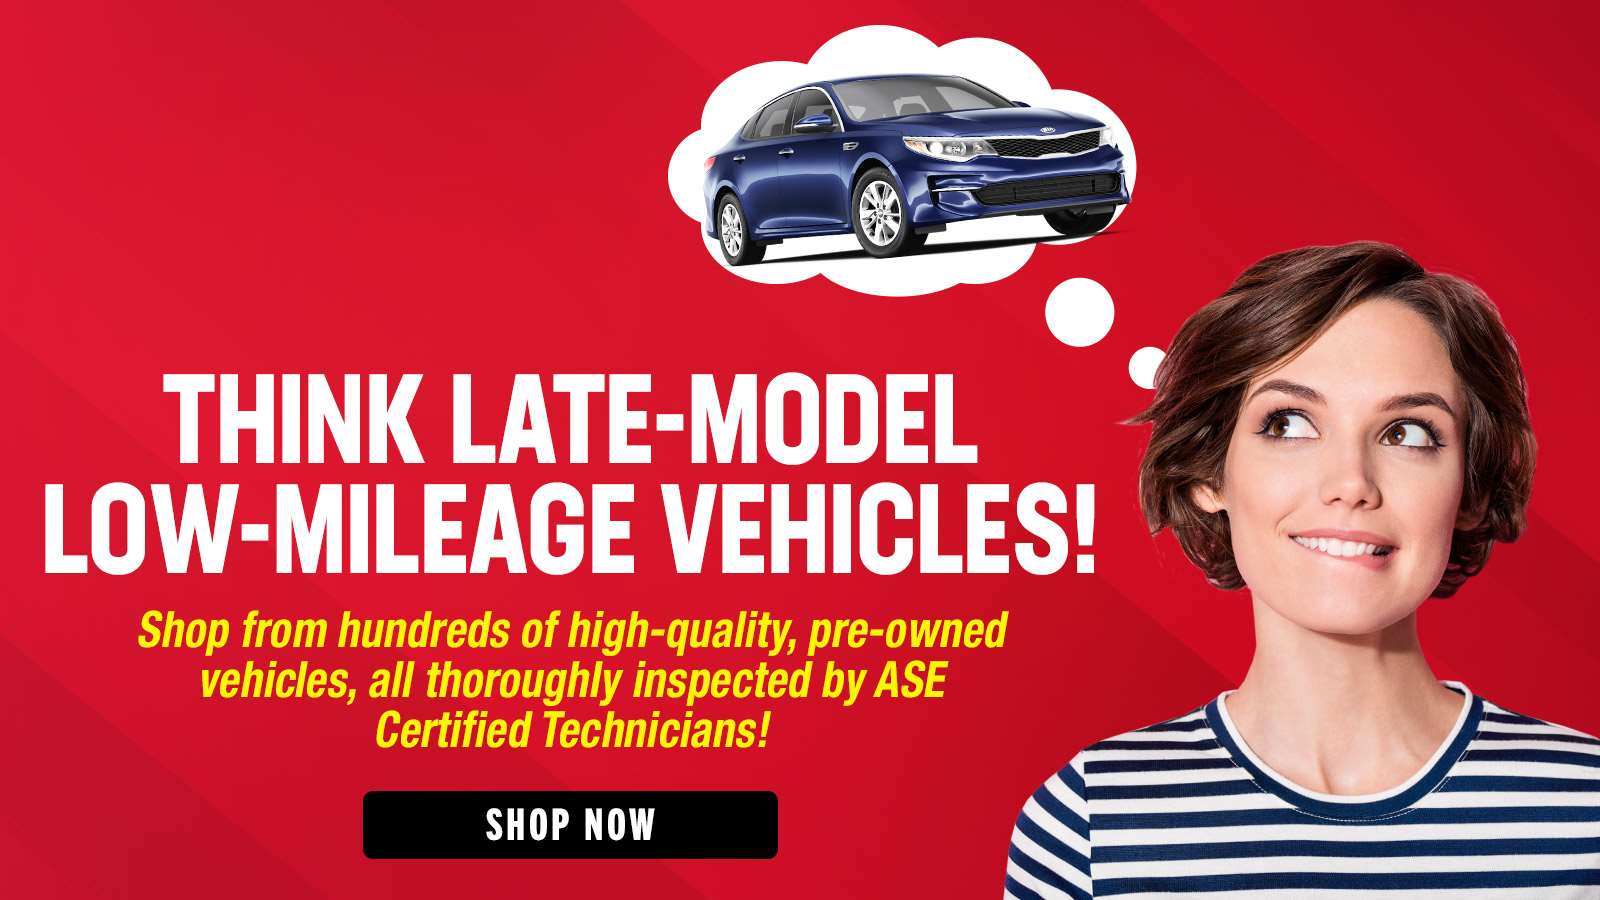 Think late-model